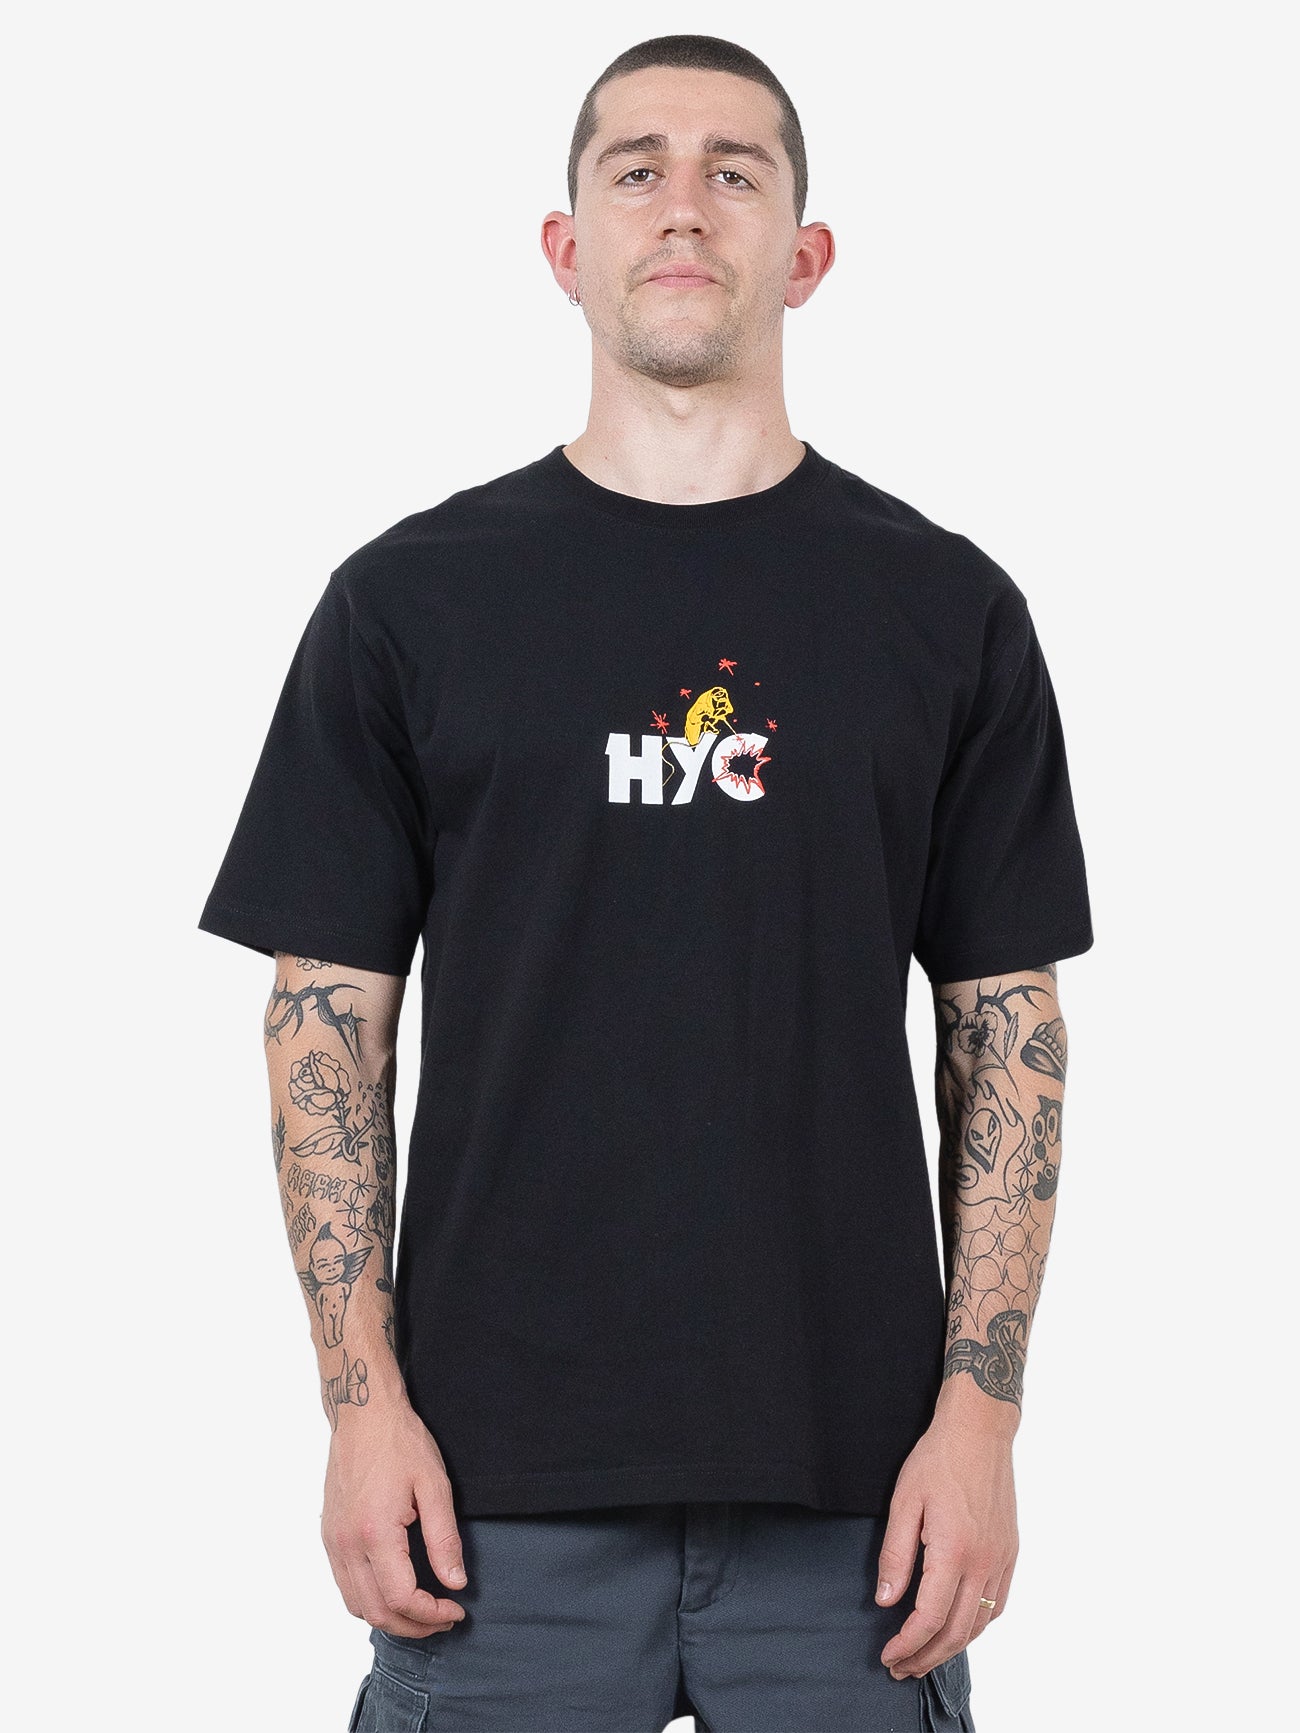 HYC Welded Oversize Fit Tee - Black